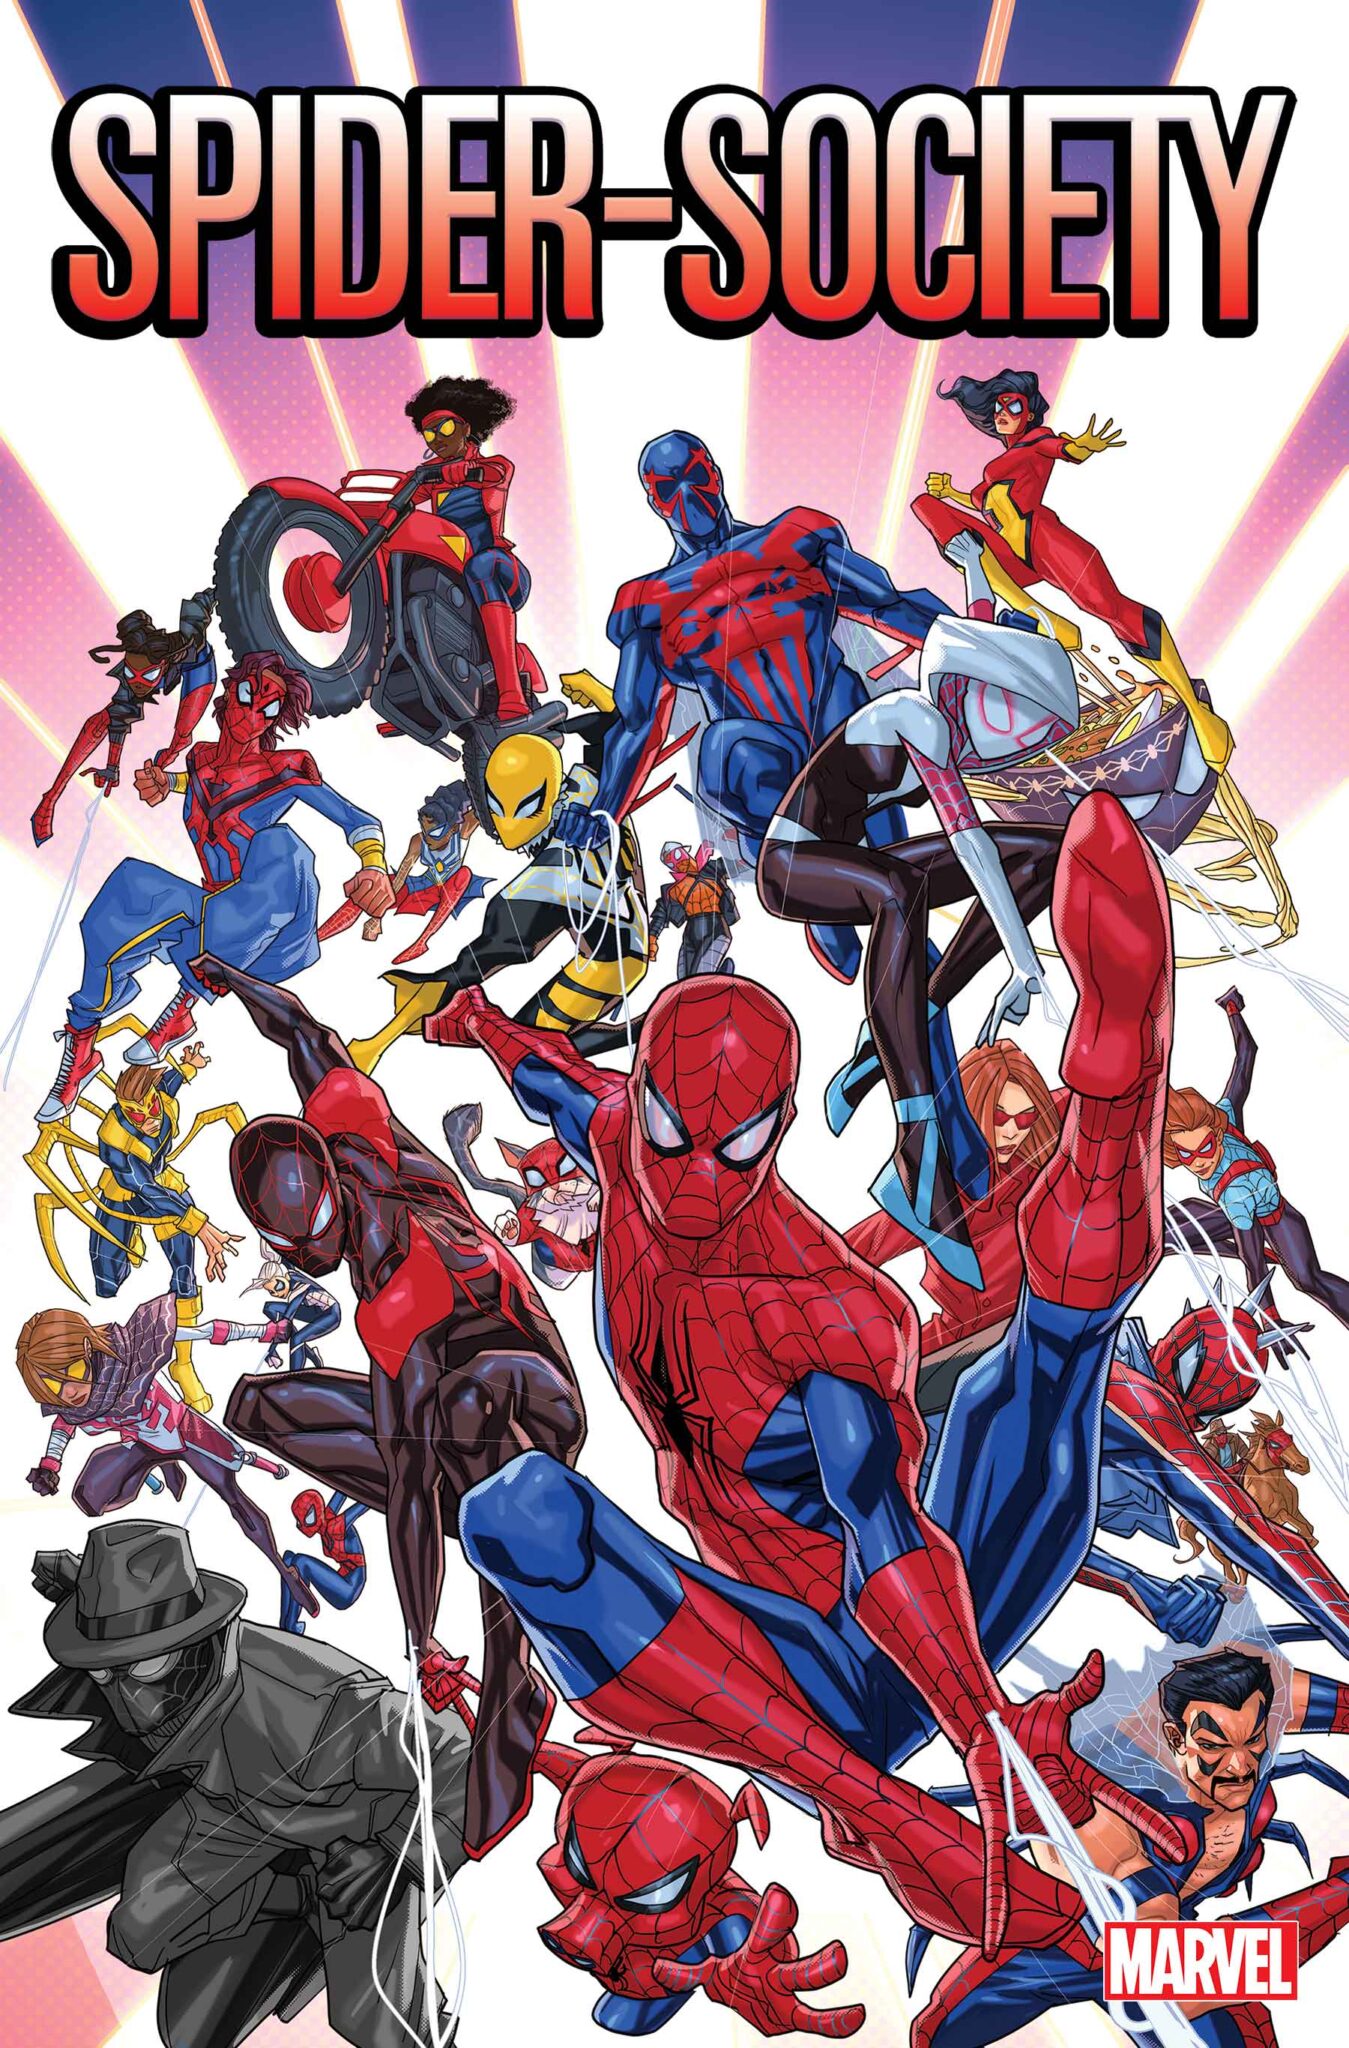 SPIDER-SOCIETY #1 cover